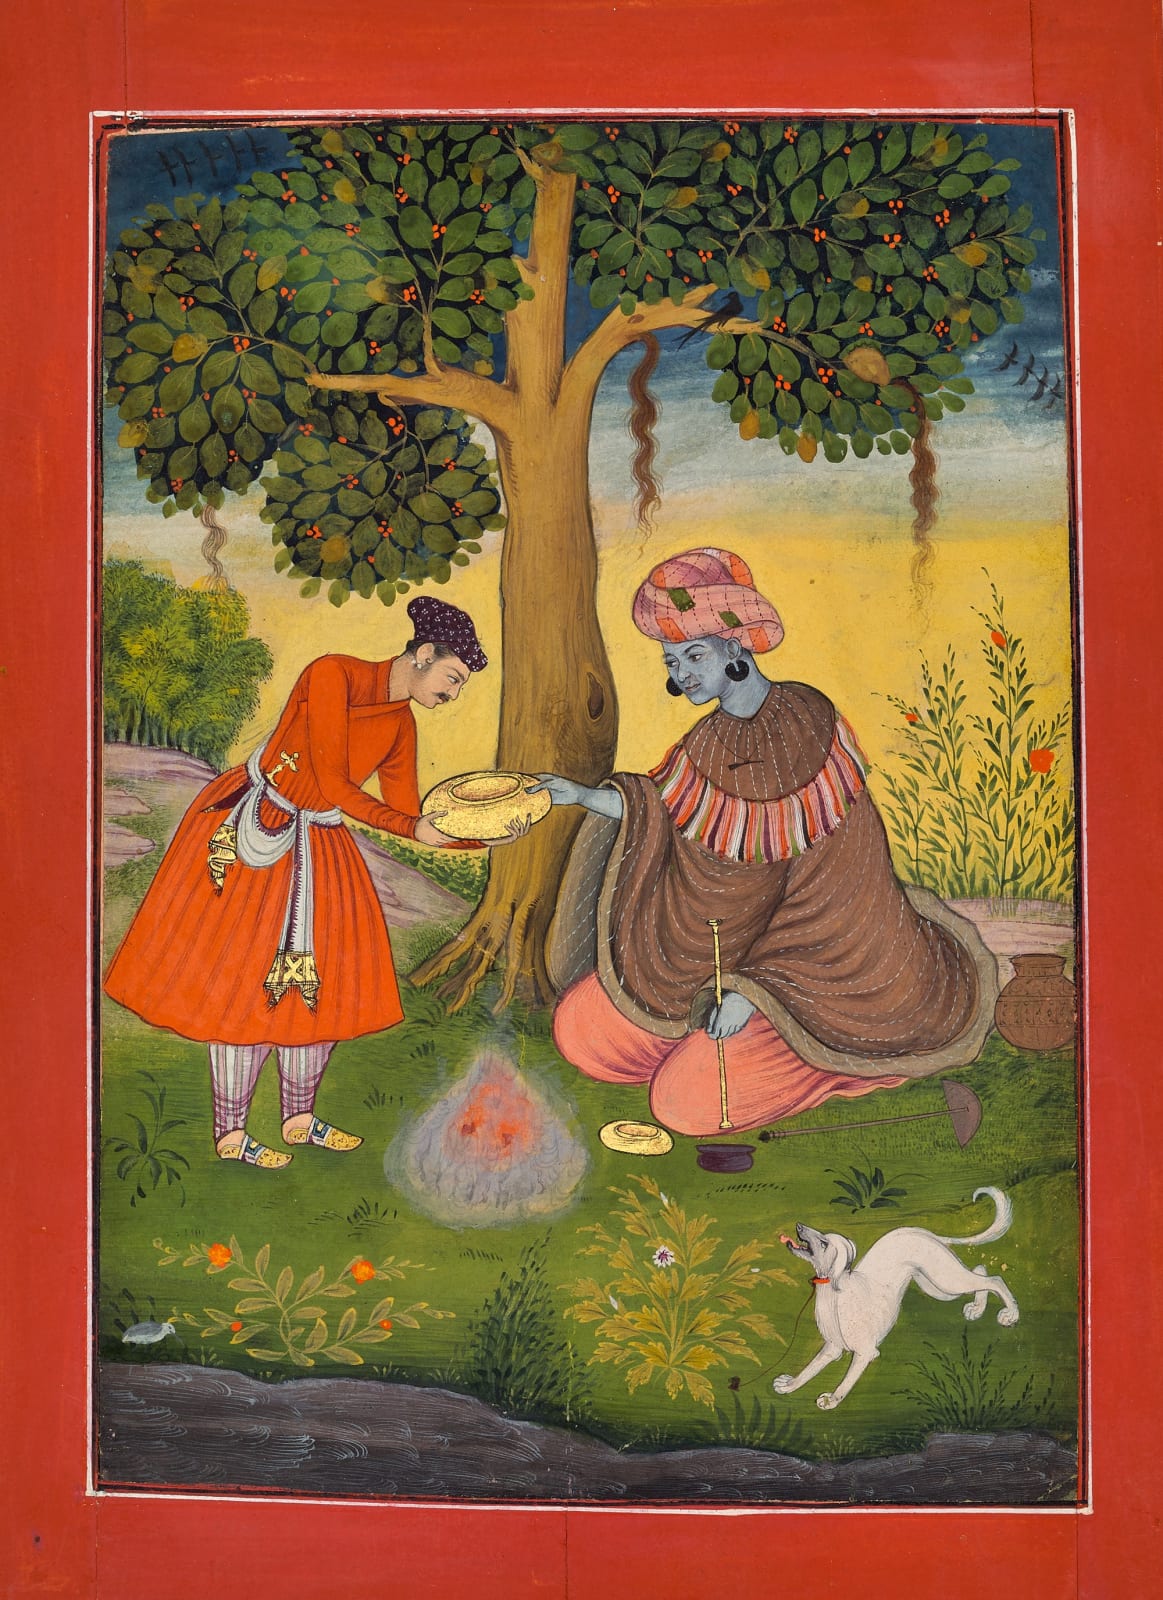 A Yogi offered a Gift, Mughal style, perhaps at Bikaner, C.1620